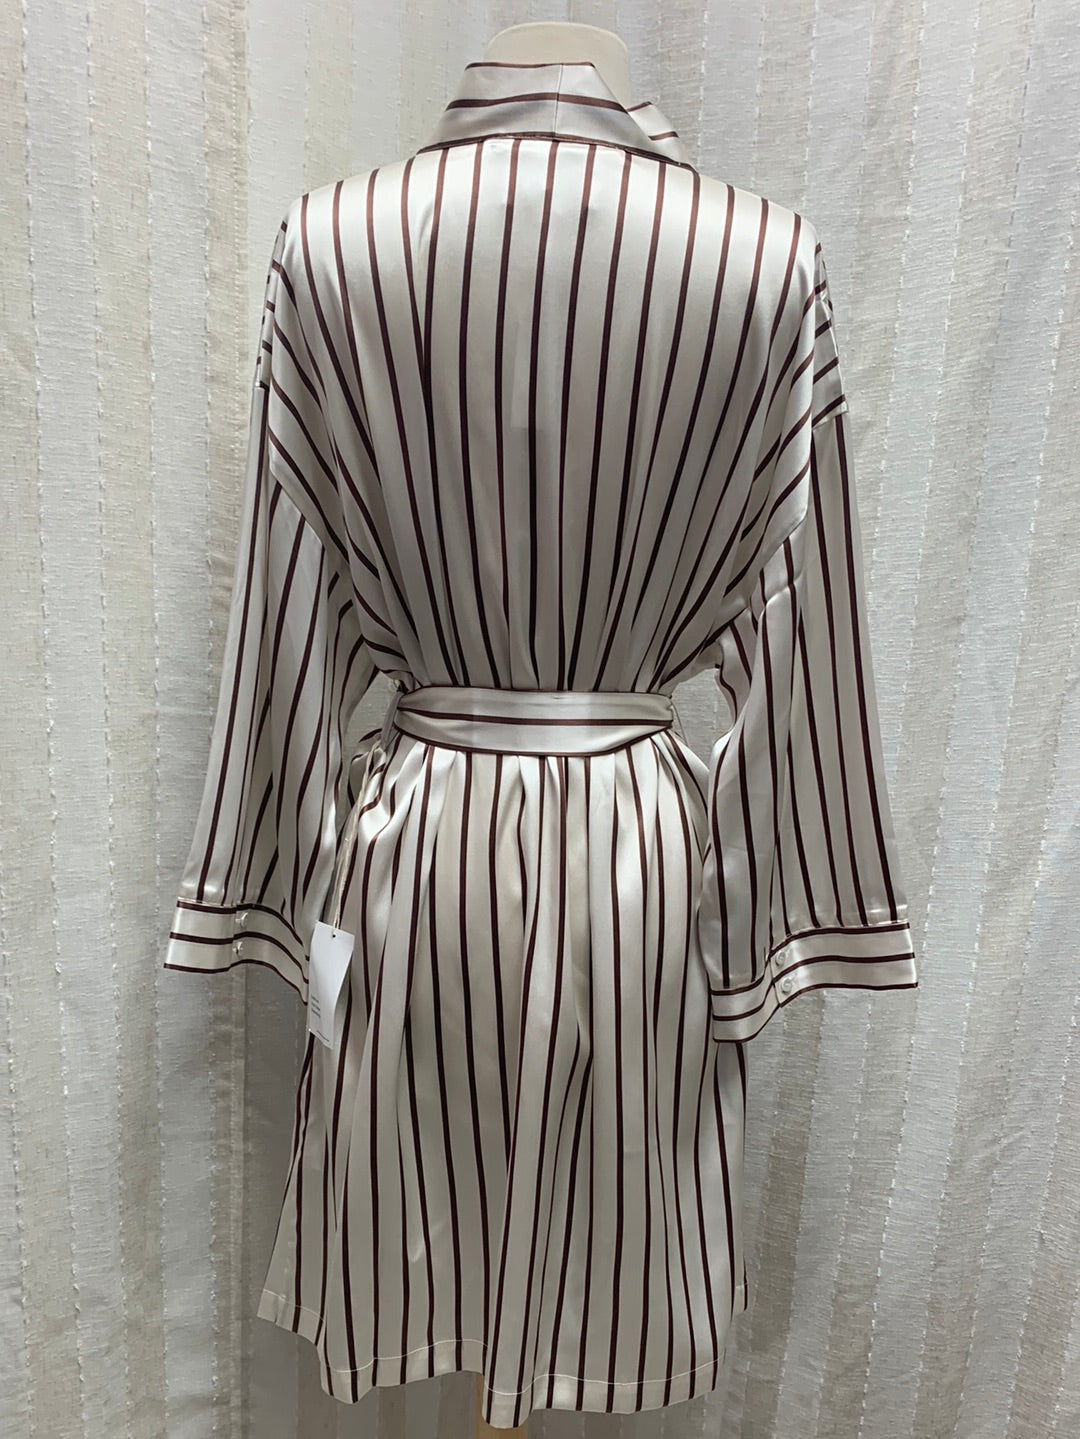 NWT - HAVEN WELL WITHIN brown stripe Washable Silk 3/4 Sleeve Robe - Medium